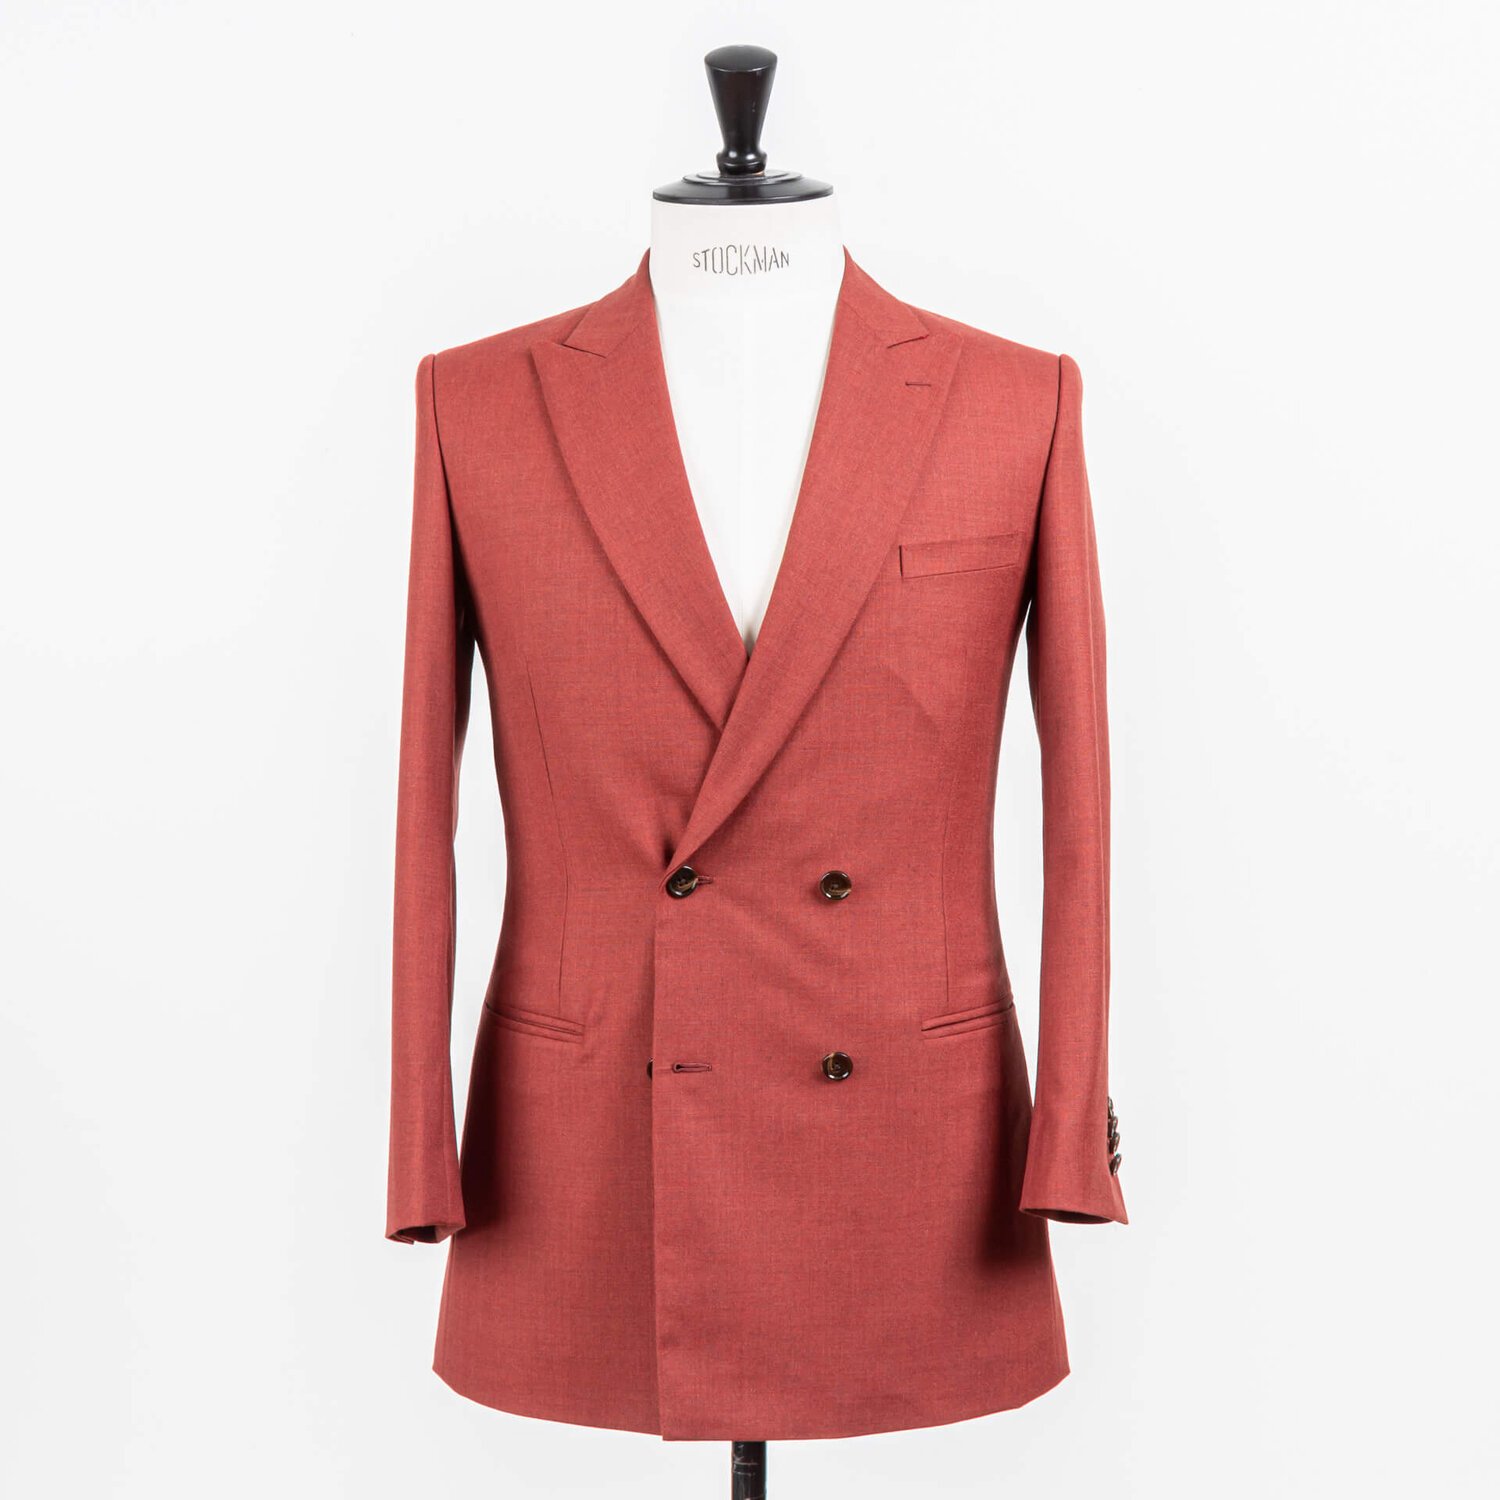   Bespoke Jacket Blazer Double Breasted 2x4 Red Solid